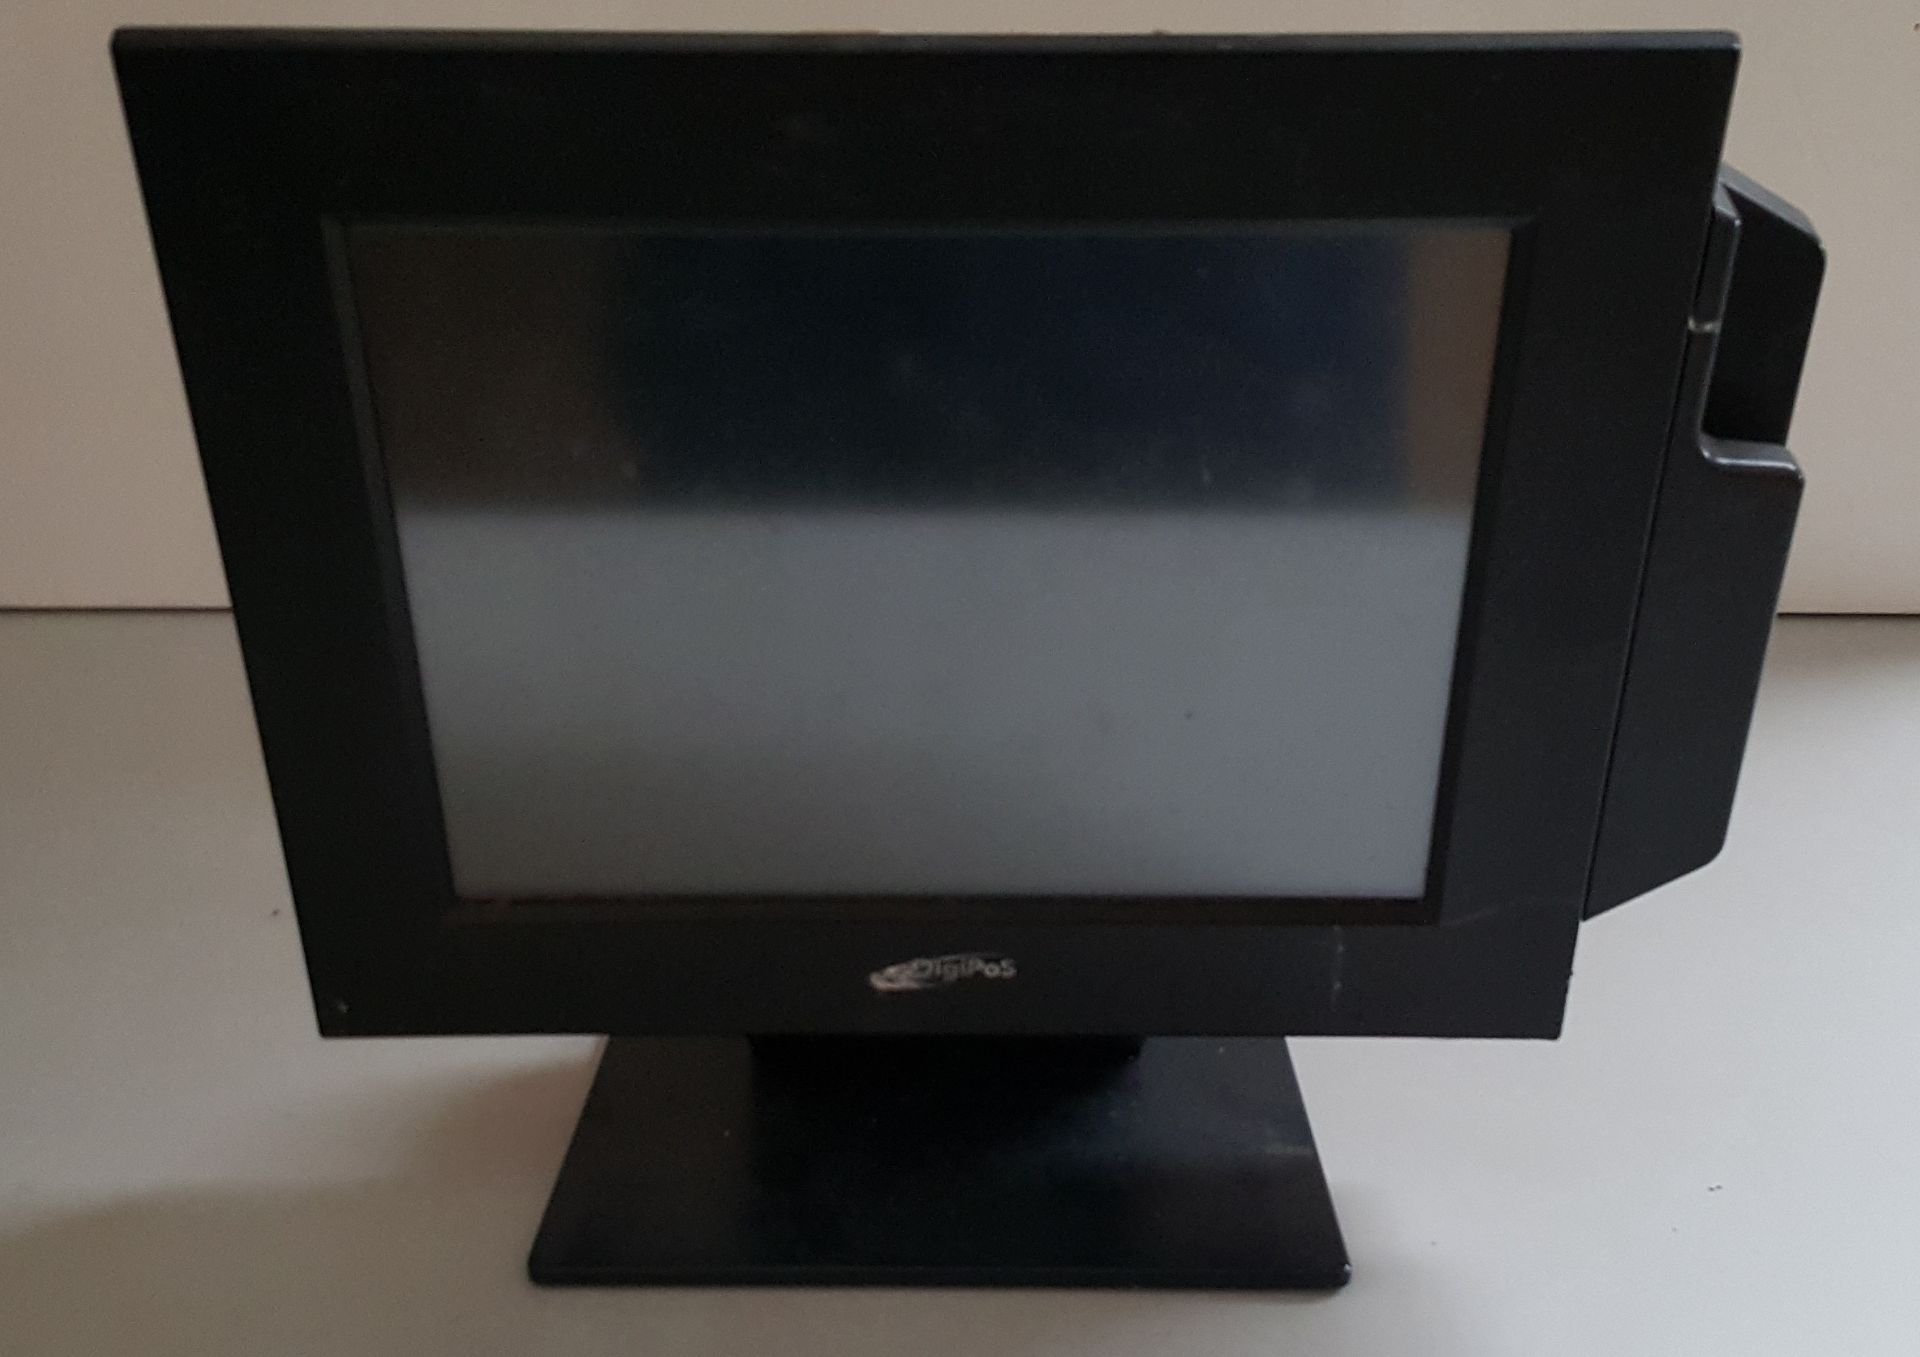 3 x Digipos 401 12" Display Touch Screen Monitor - Ref RC138 - CL011 - Location: Altrincham WA14 - Image 2 of 4